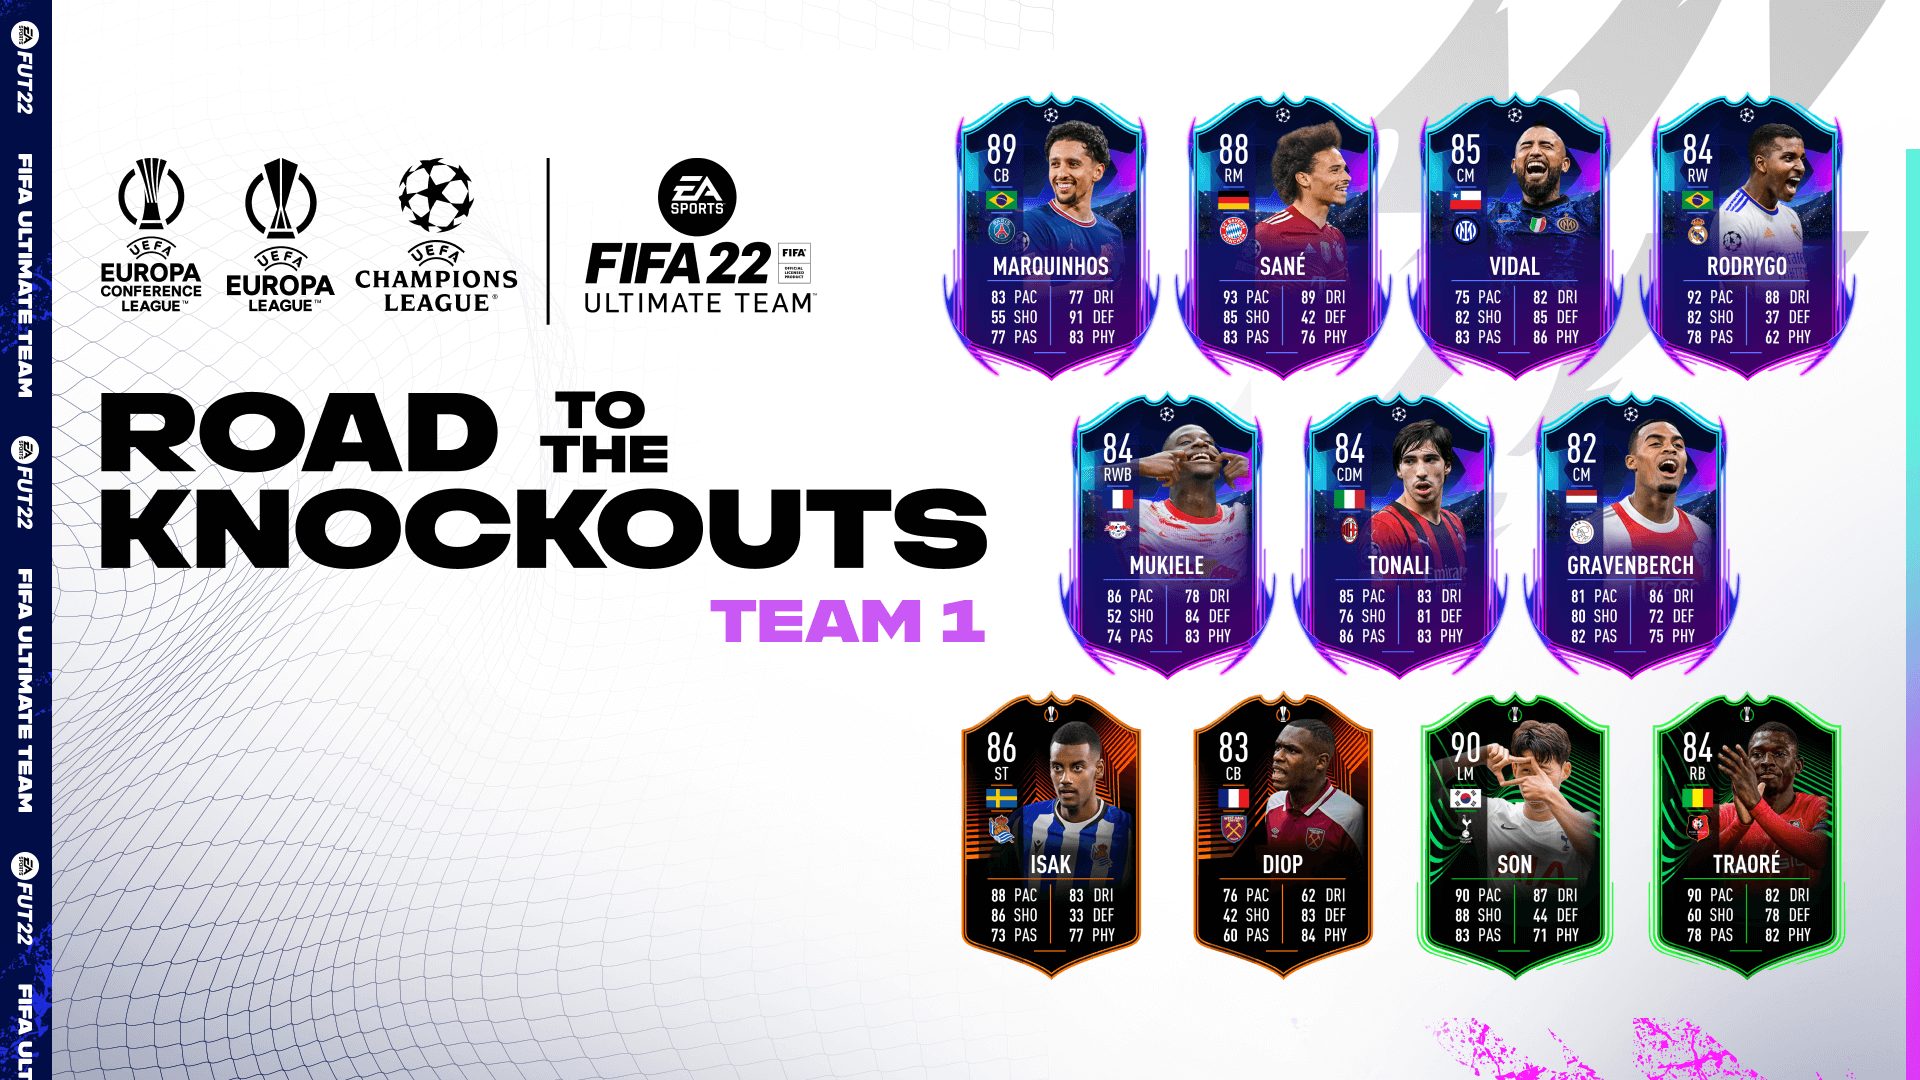 FIFA 22 Ultimate Team Road to the Knockouts EA SPORTS Official Site